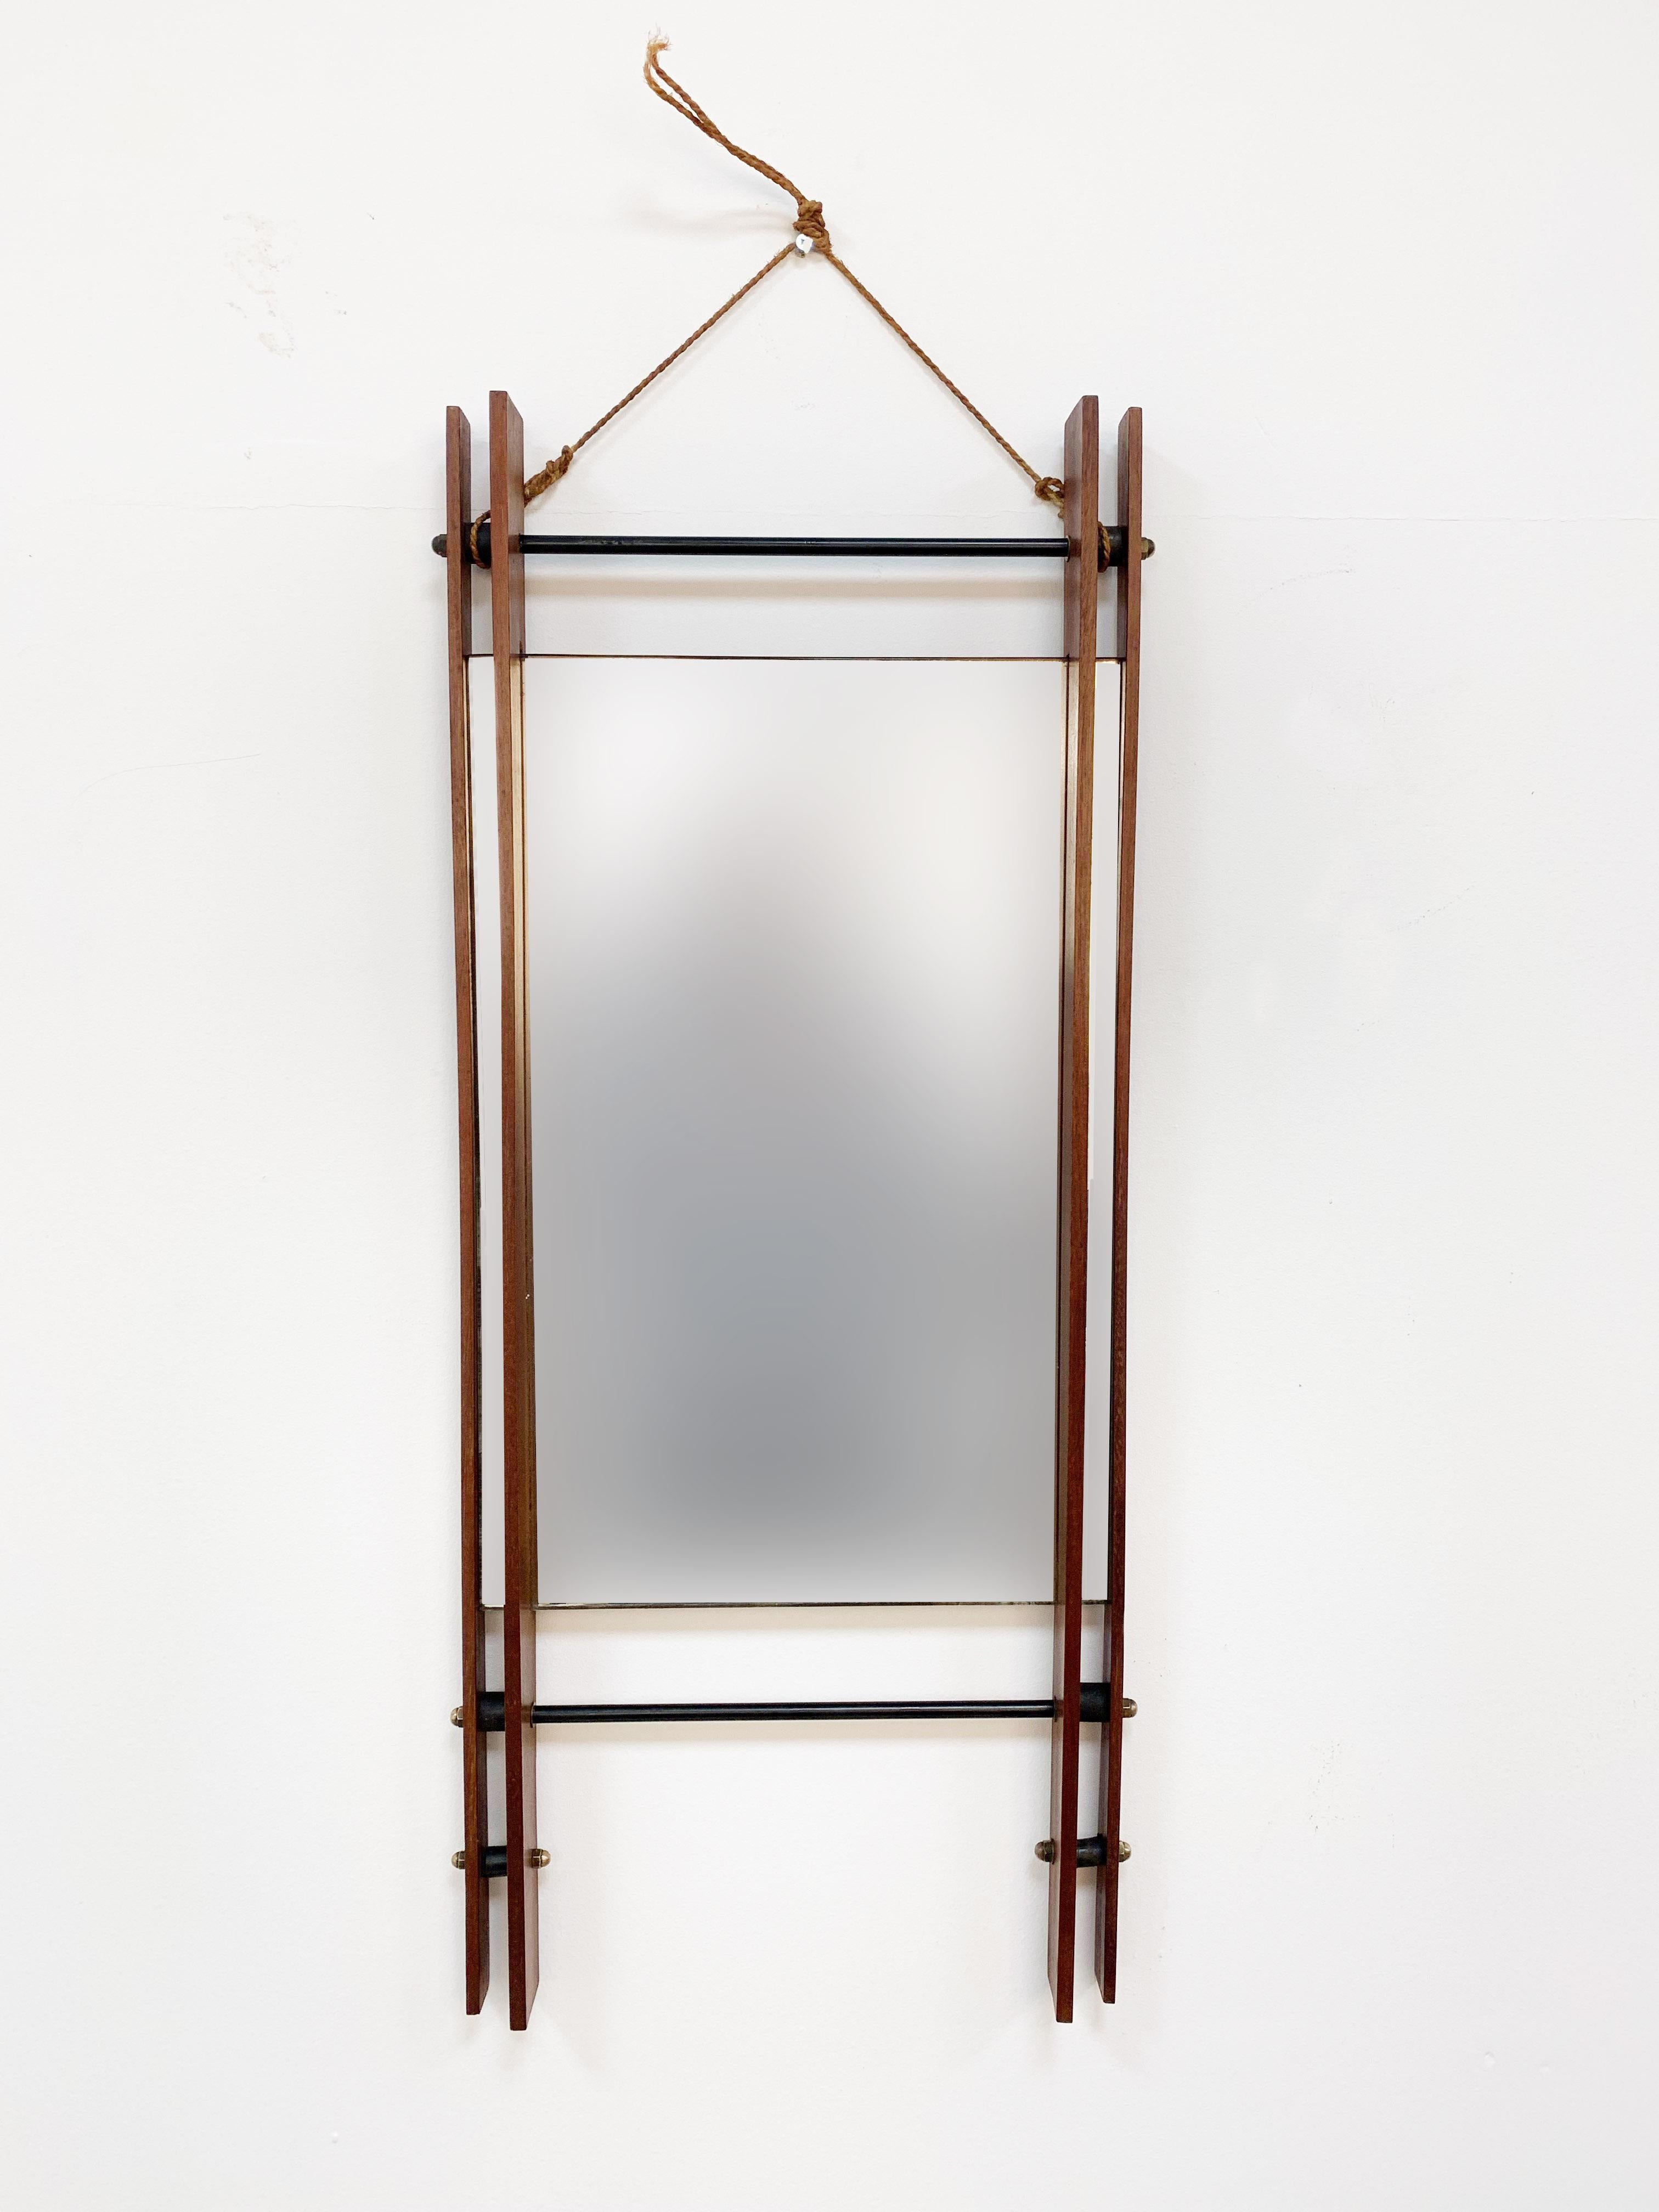 Rope Rectangular Mirror with Double Teak Frame, Wall Mirror, Italy, 1950s